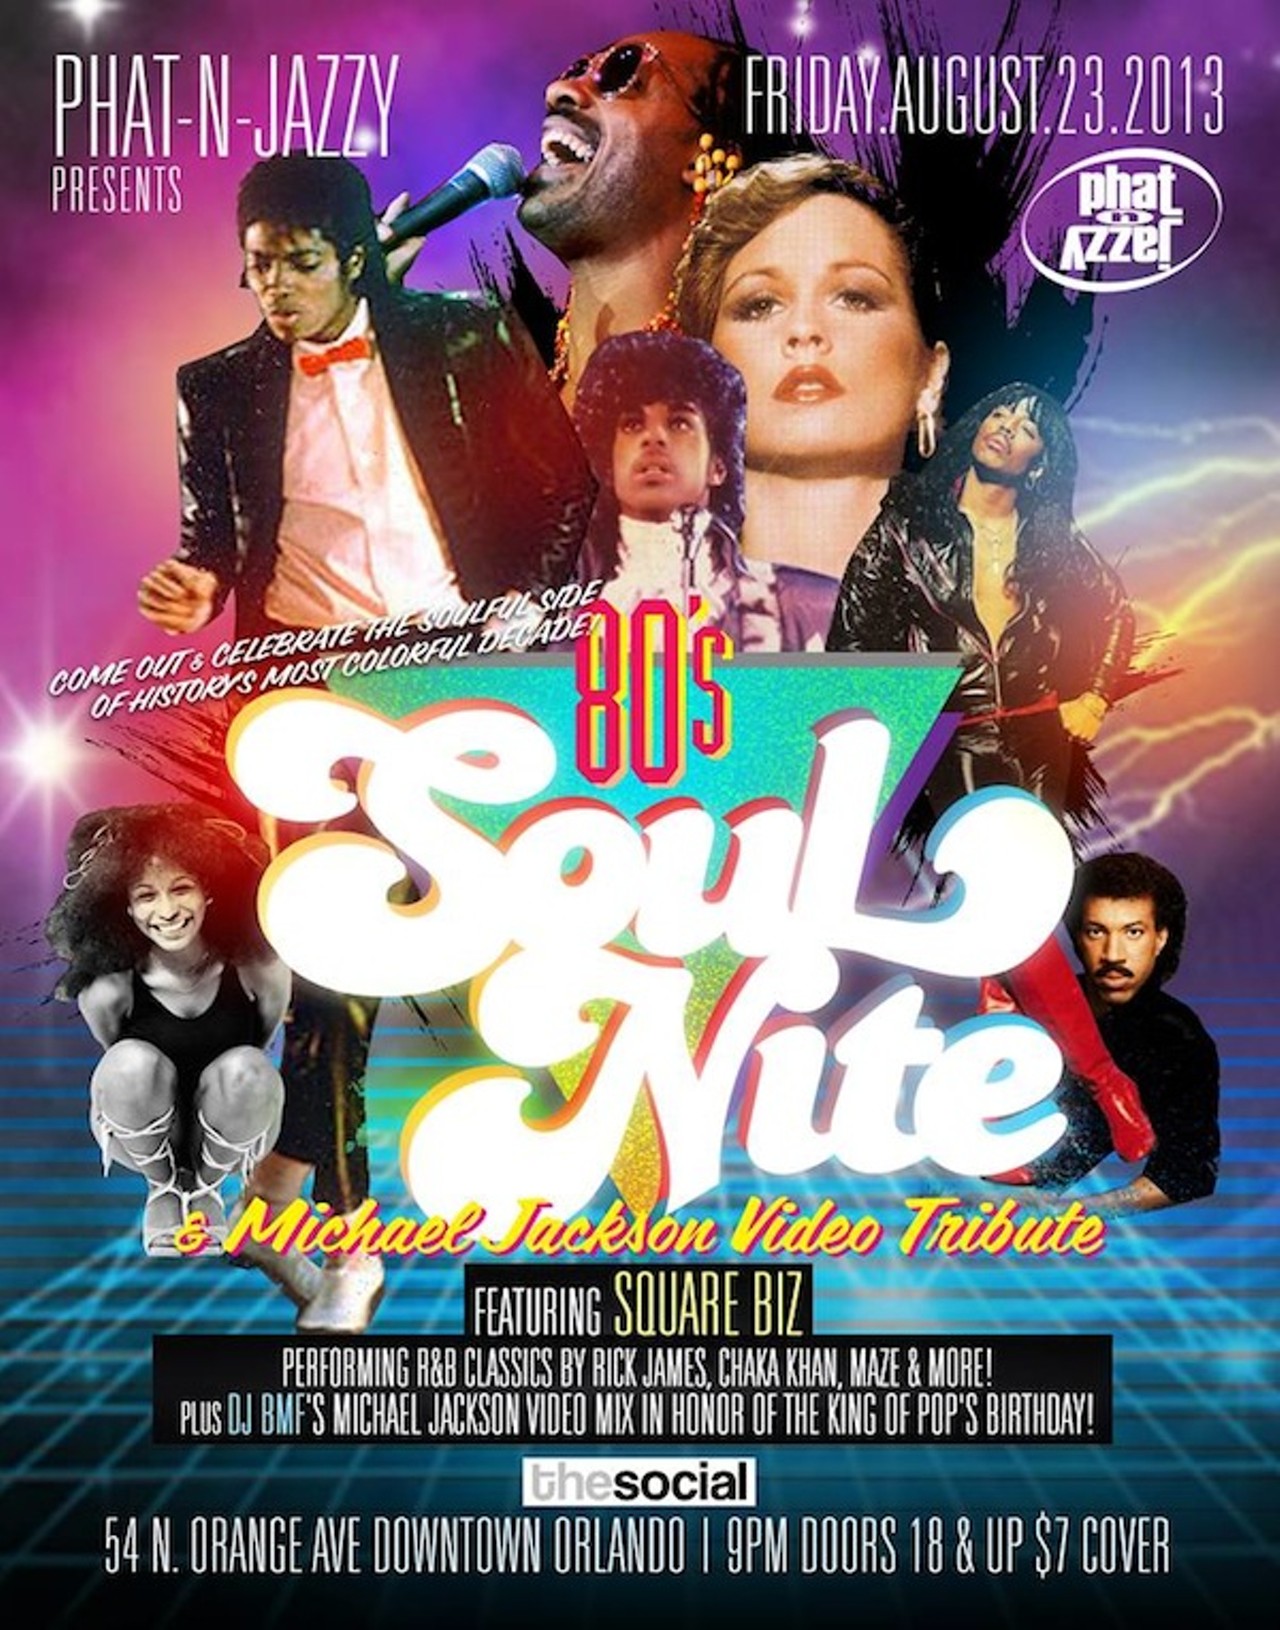 Phat-N-Jazzy Presents '80s Soul Night and Michael Jackson Video Tribute
Friday, Aug. 23
9 p.m.
The Social, 54 N. Orange Ave.
407-246-1419
thesocial.org
$7
It might be the king of pop&#146;s birthday they&#146;re celebrating but the party&#146;s all for you, Orlando. Phat-N-Jazzy presents a special &#146;80s soul night featuring live music from Square Biz, which brings together members of the Gerry Williams Band and the Legendary JCs to cover classic R&B, from Prince to Chaka Khan to Teena Marie, as if the summer weren&#146;t hot enough already, dang. DJ BMF will also be there doing his Michael Jackson video mix in tribute to the birthday boy. On the Facebook event page, they request that people turn up in their vintage gear; we&#146;d like to plead with you to take that request as seriously as you took those styles back in the day. This sounds like a retro party done right, so if you&#146;ve been waiting around for someone to tell you something good, listen up, &#146;cuz ain&#146;t nobody loves you better than P-N-J. &#150; Ashley Belanger